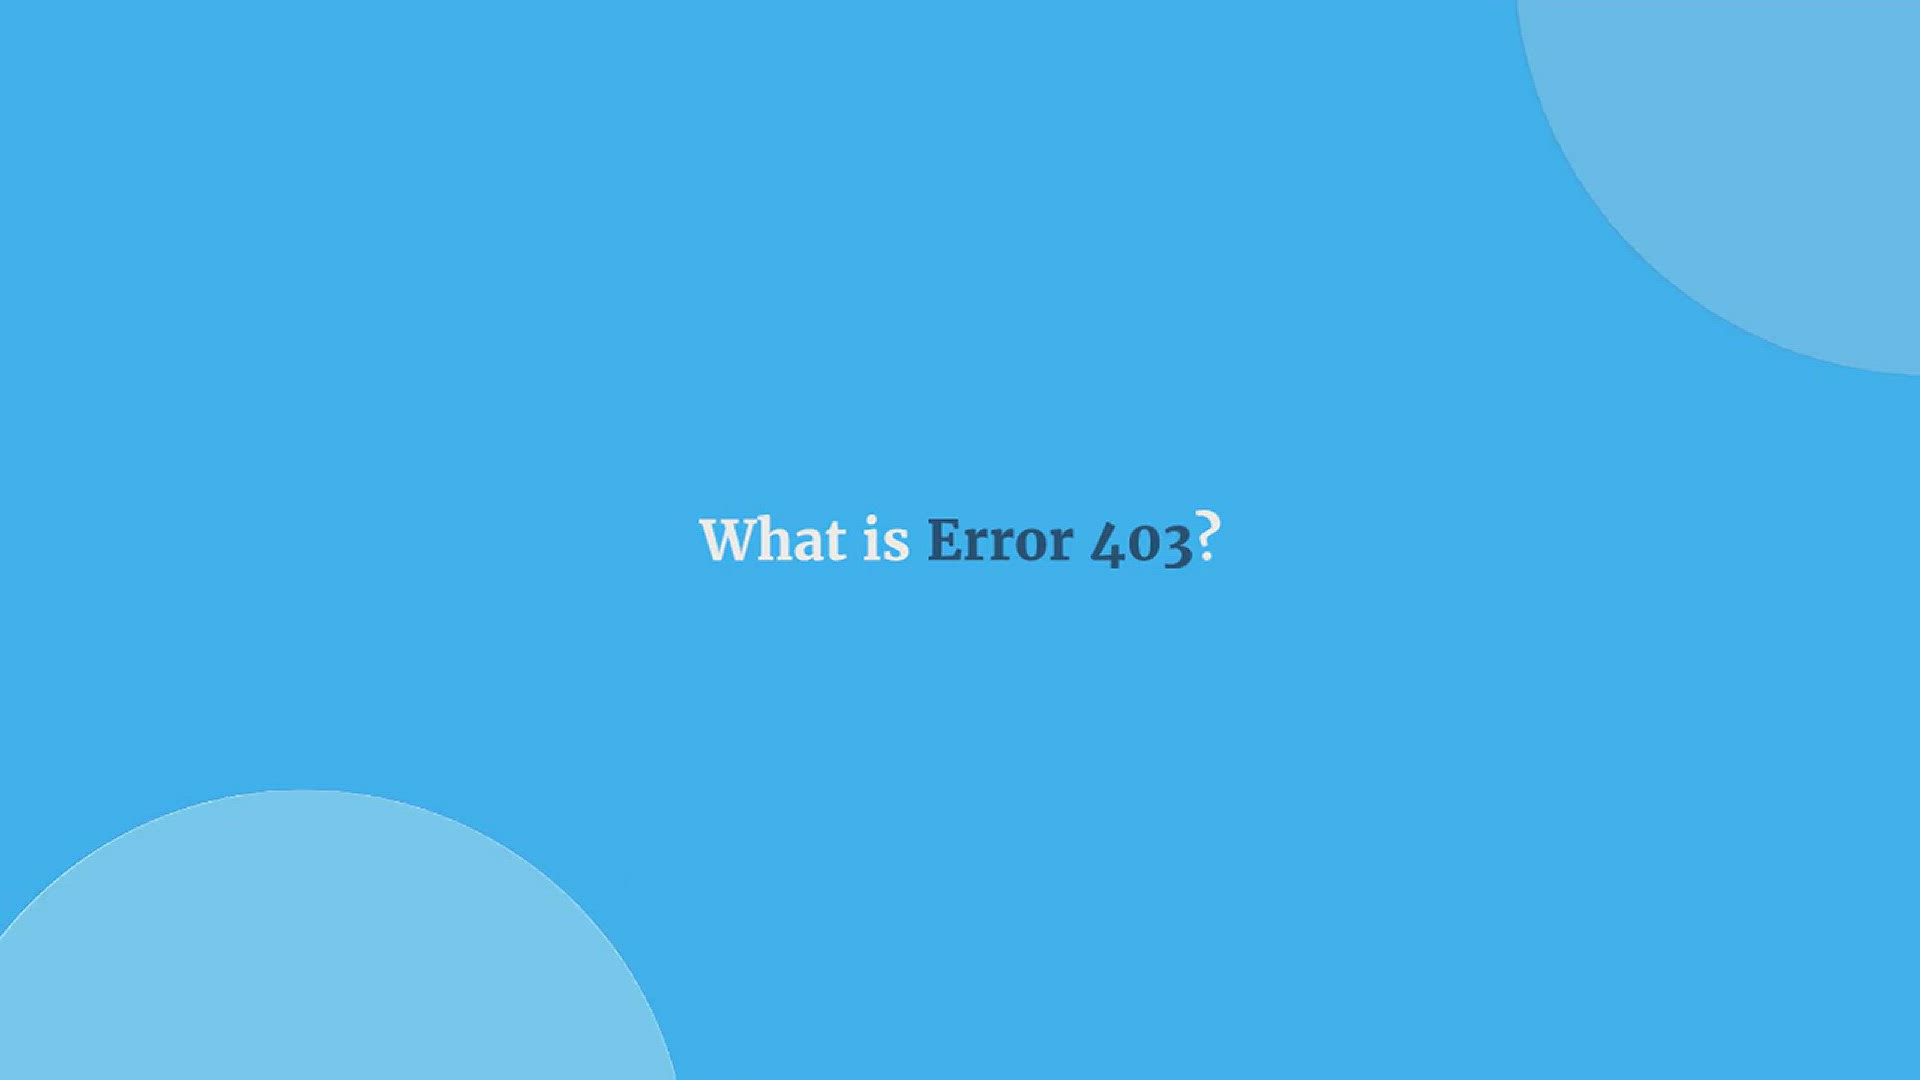 401 vs. 403 Error Codes: What's the Difference? When to Use Each